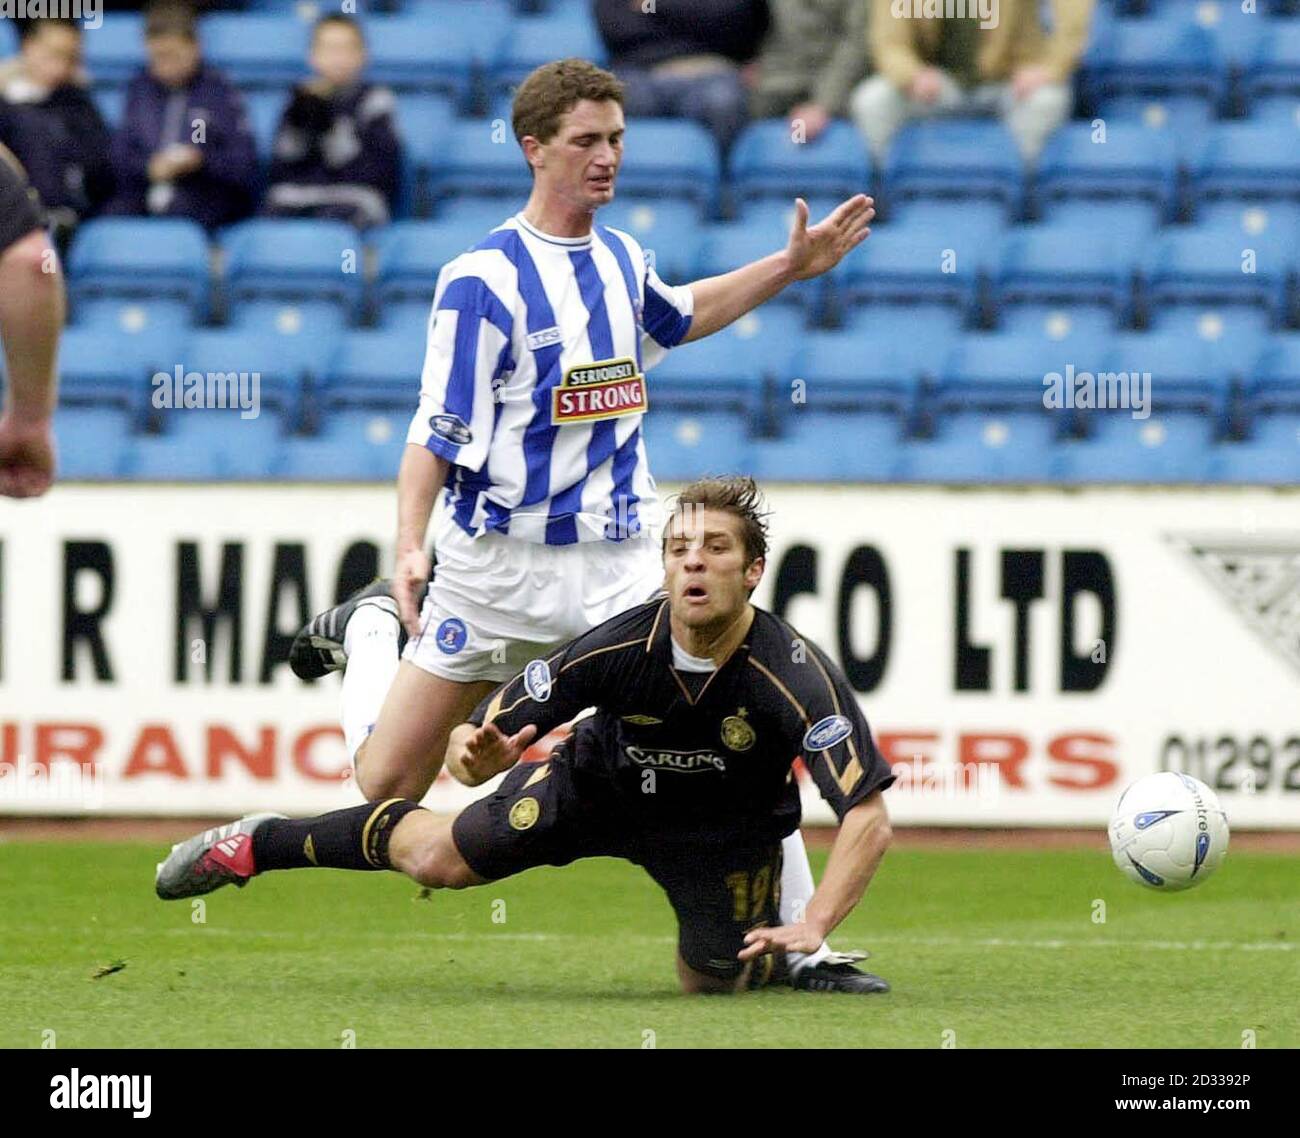 Celtic's Stilian Petrov earns a penalty after being tackled by Kilmarnock's Gary Mcdonald (top) during their Bank of Scotland Scottish Premiership match at Kilmarnock's Rugby Park ground. Stock Photo